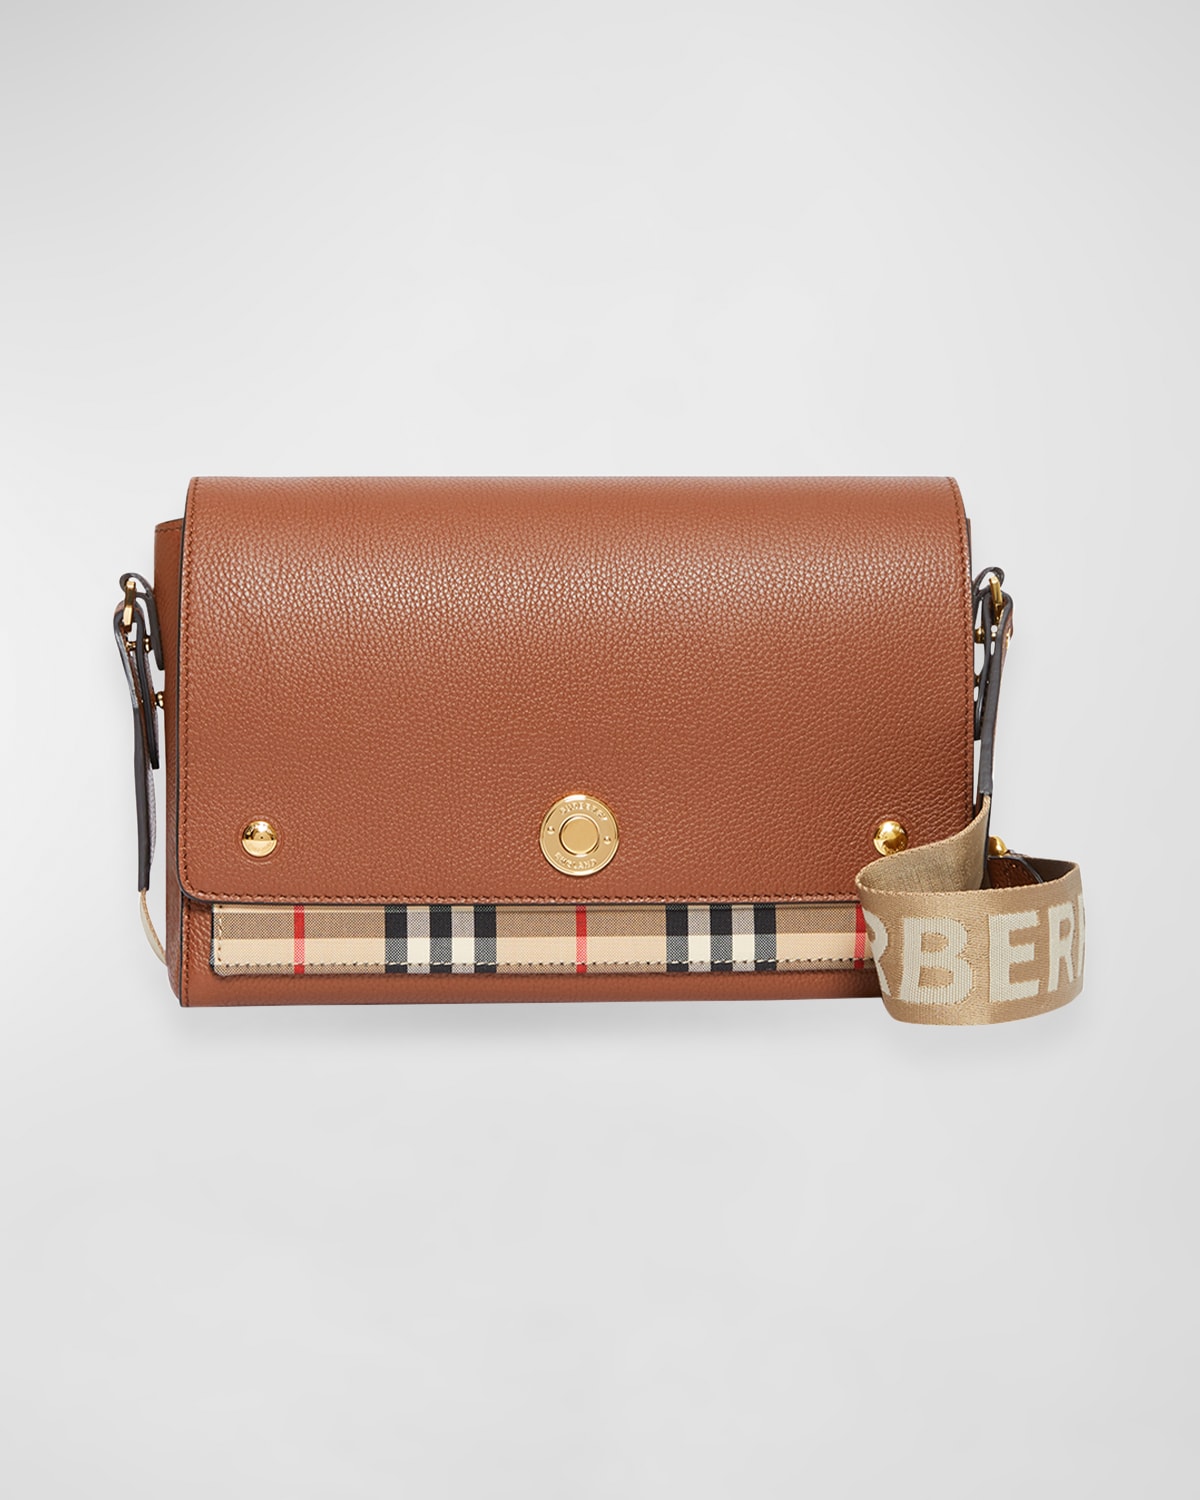 Burberry Note Medium Vintage Check & Leather Crossbody Bag with Logo Web Strap